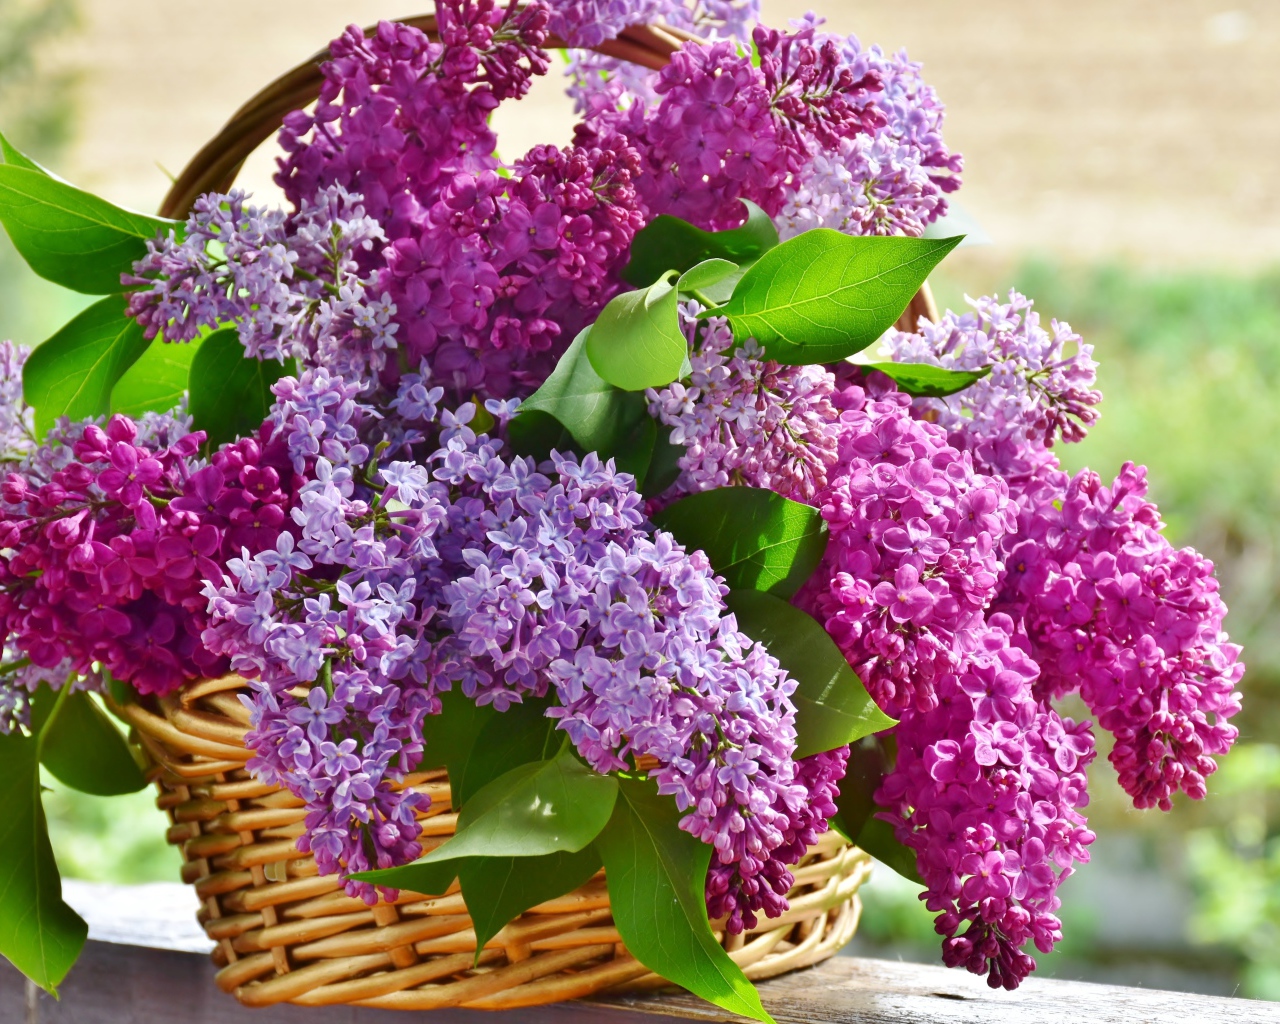 A bouquet of beautiful lilac in a basket